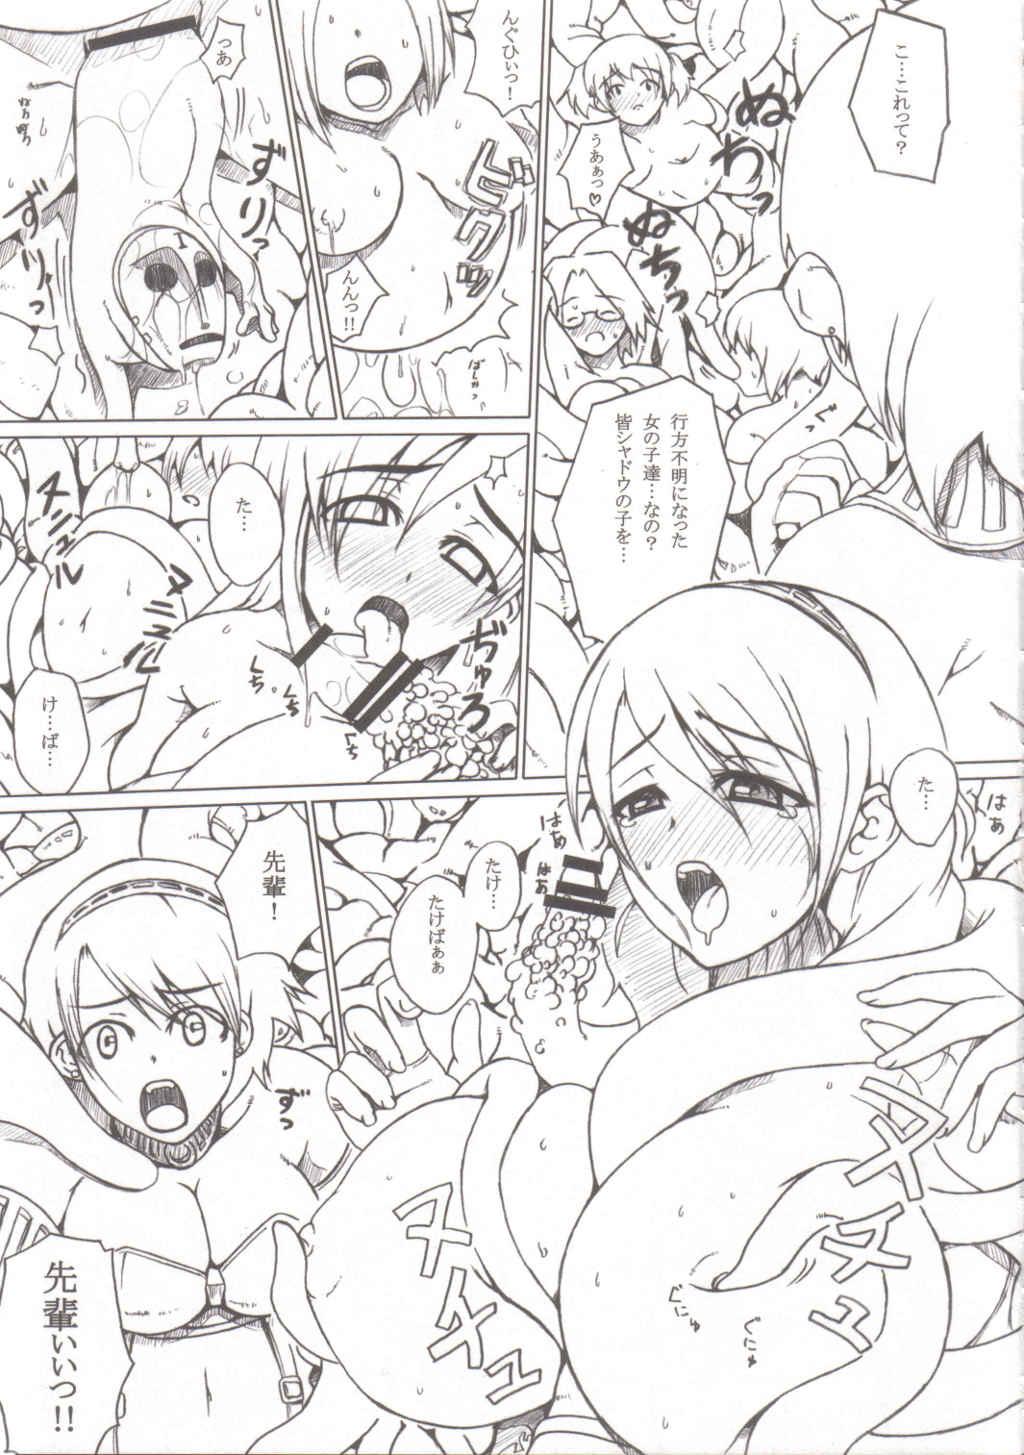 Furry P3;YM - Persona 3 Prostitute - Page 9